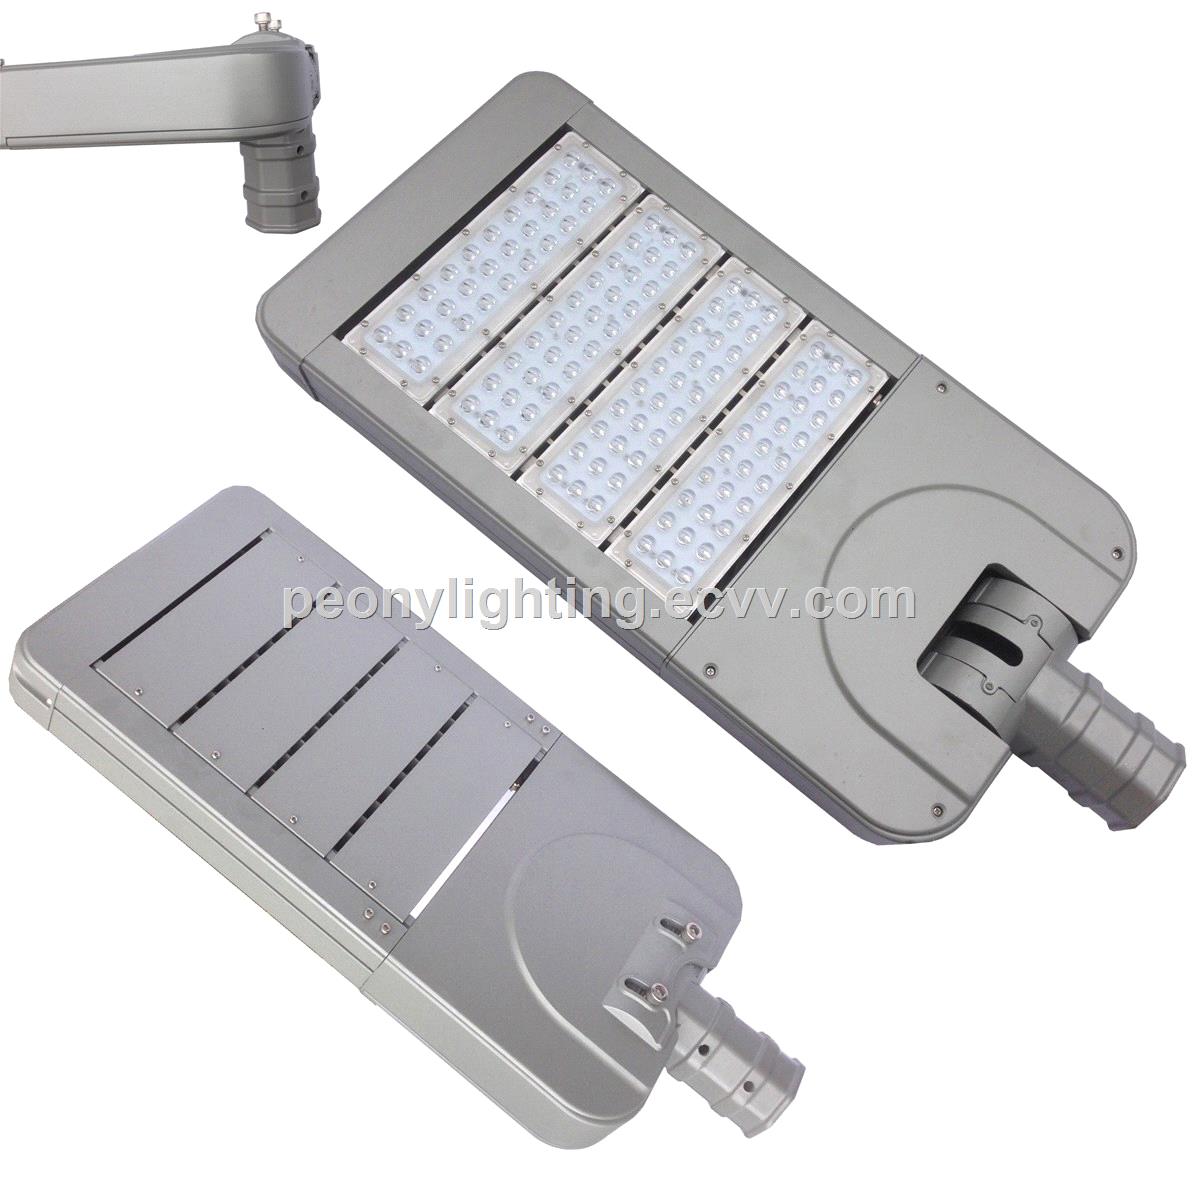 BIG SALE 200w outdoor adjustable LED street light cheap led street light solarwith CE ROHS approval